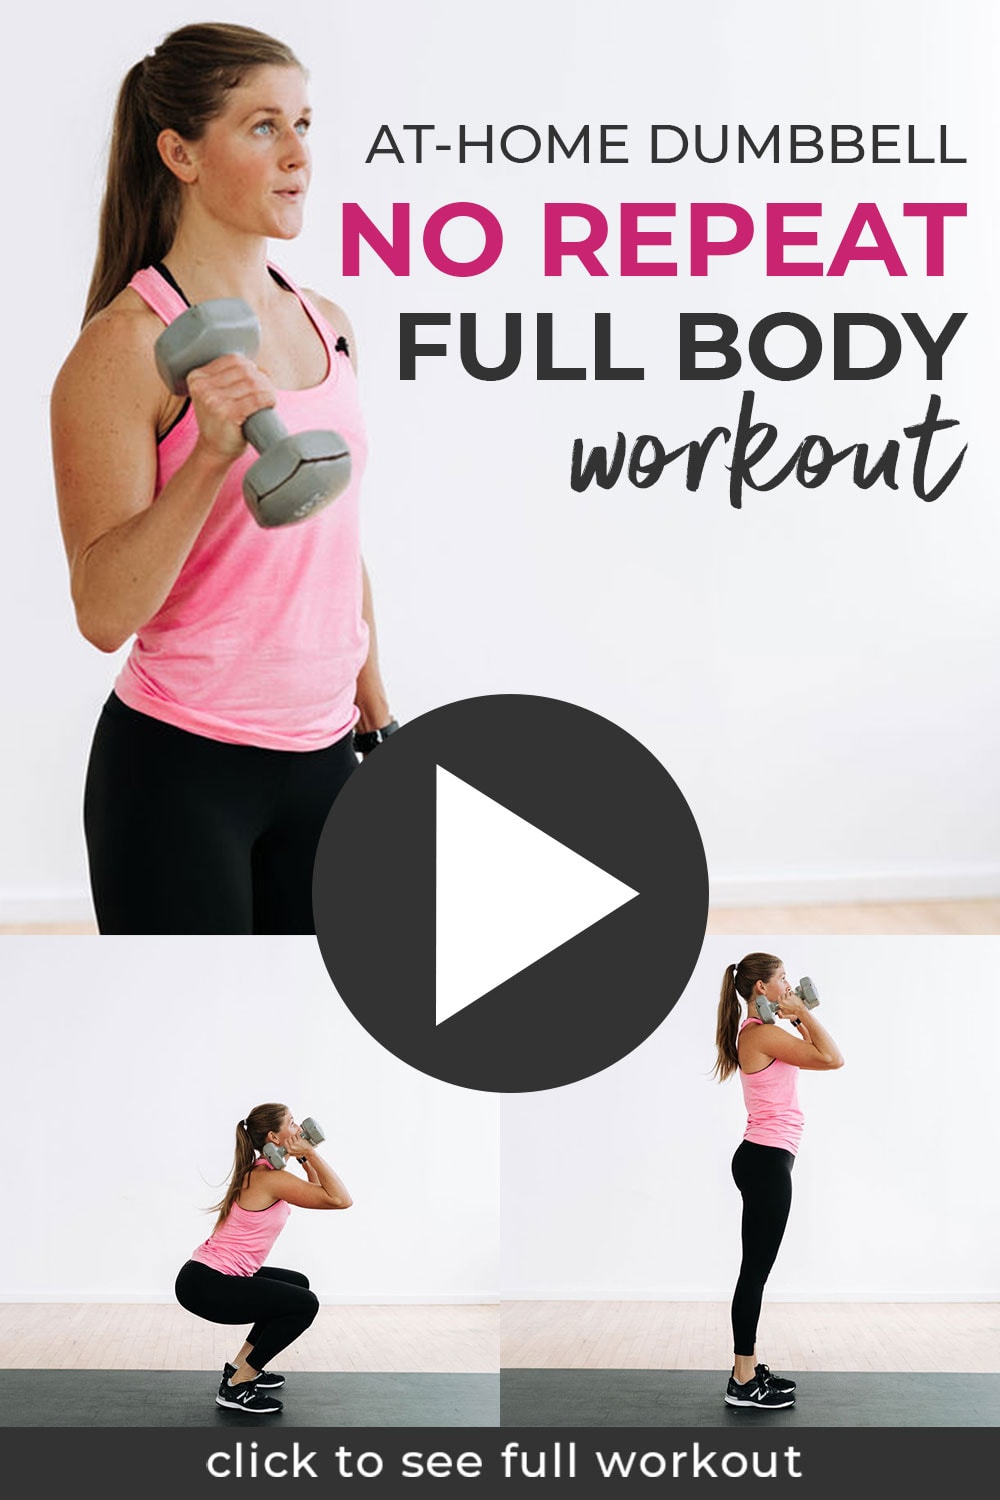 6 Day Full Body Workout With Weights No Repeats for Push Pull Legs